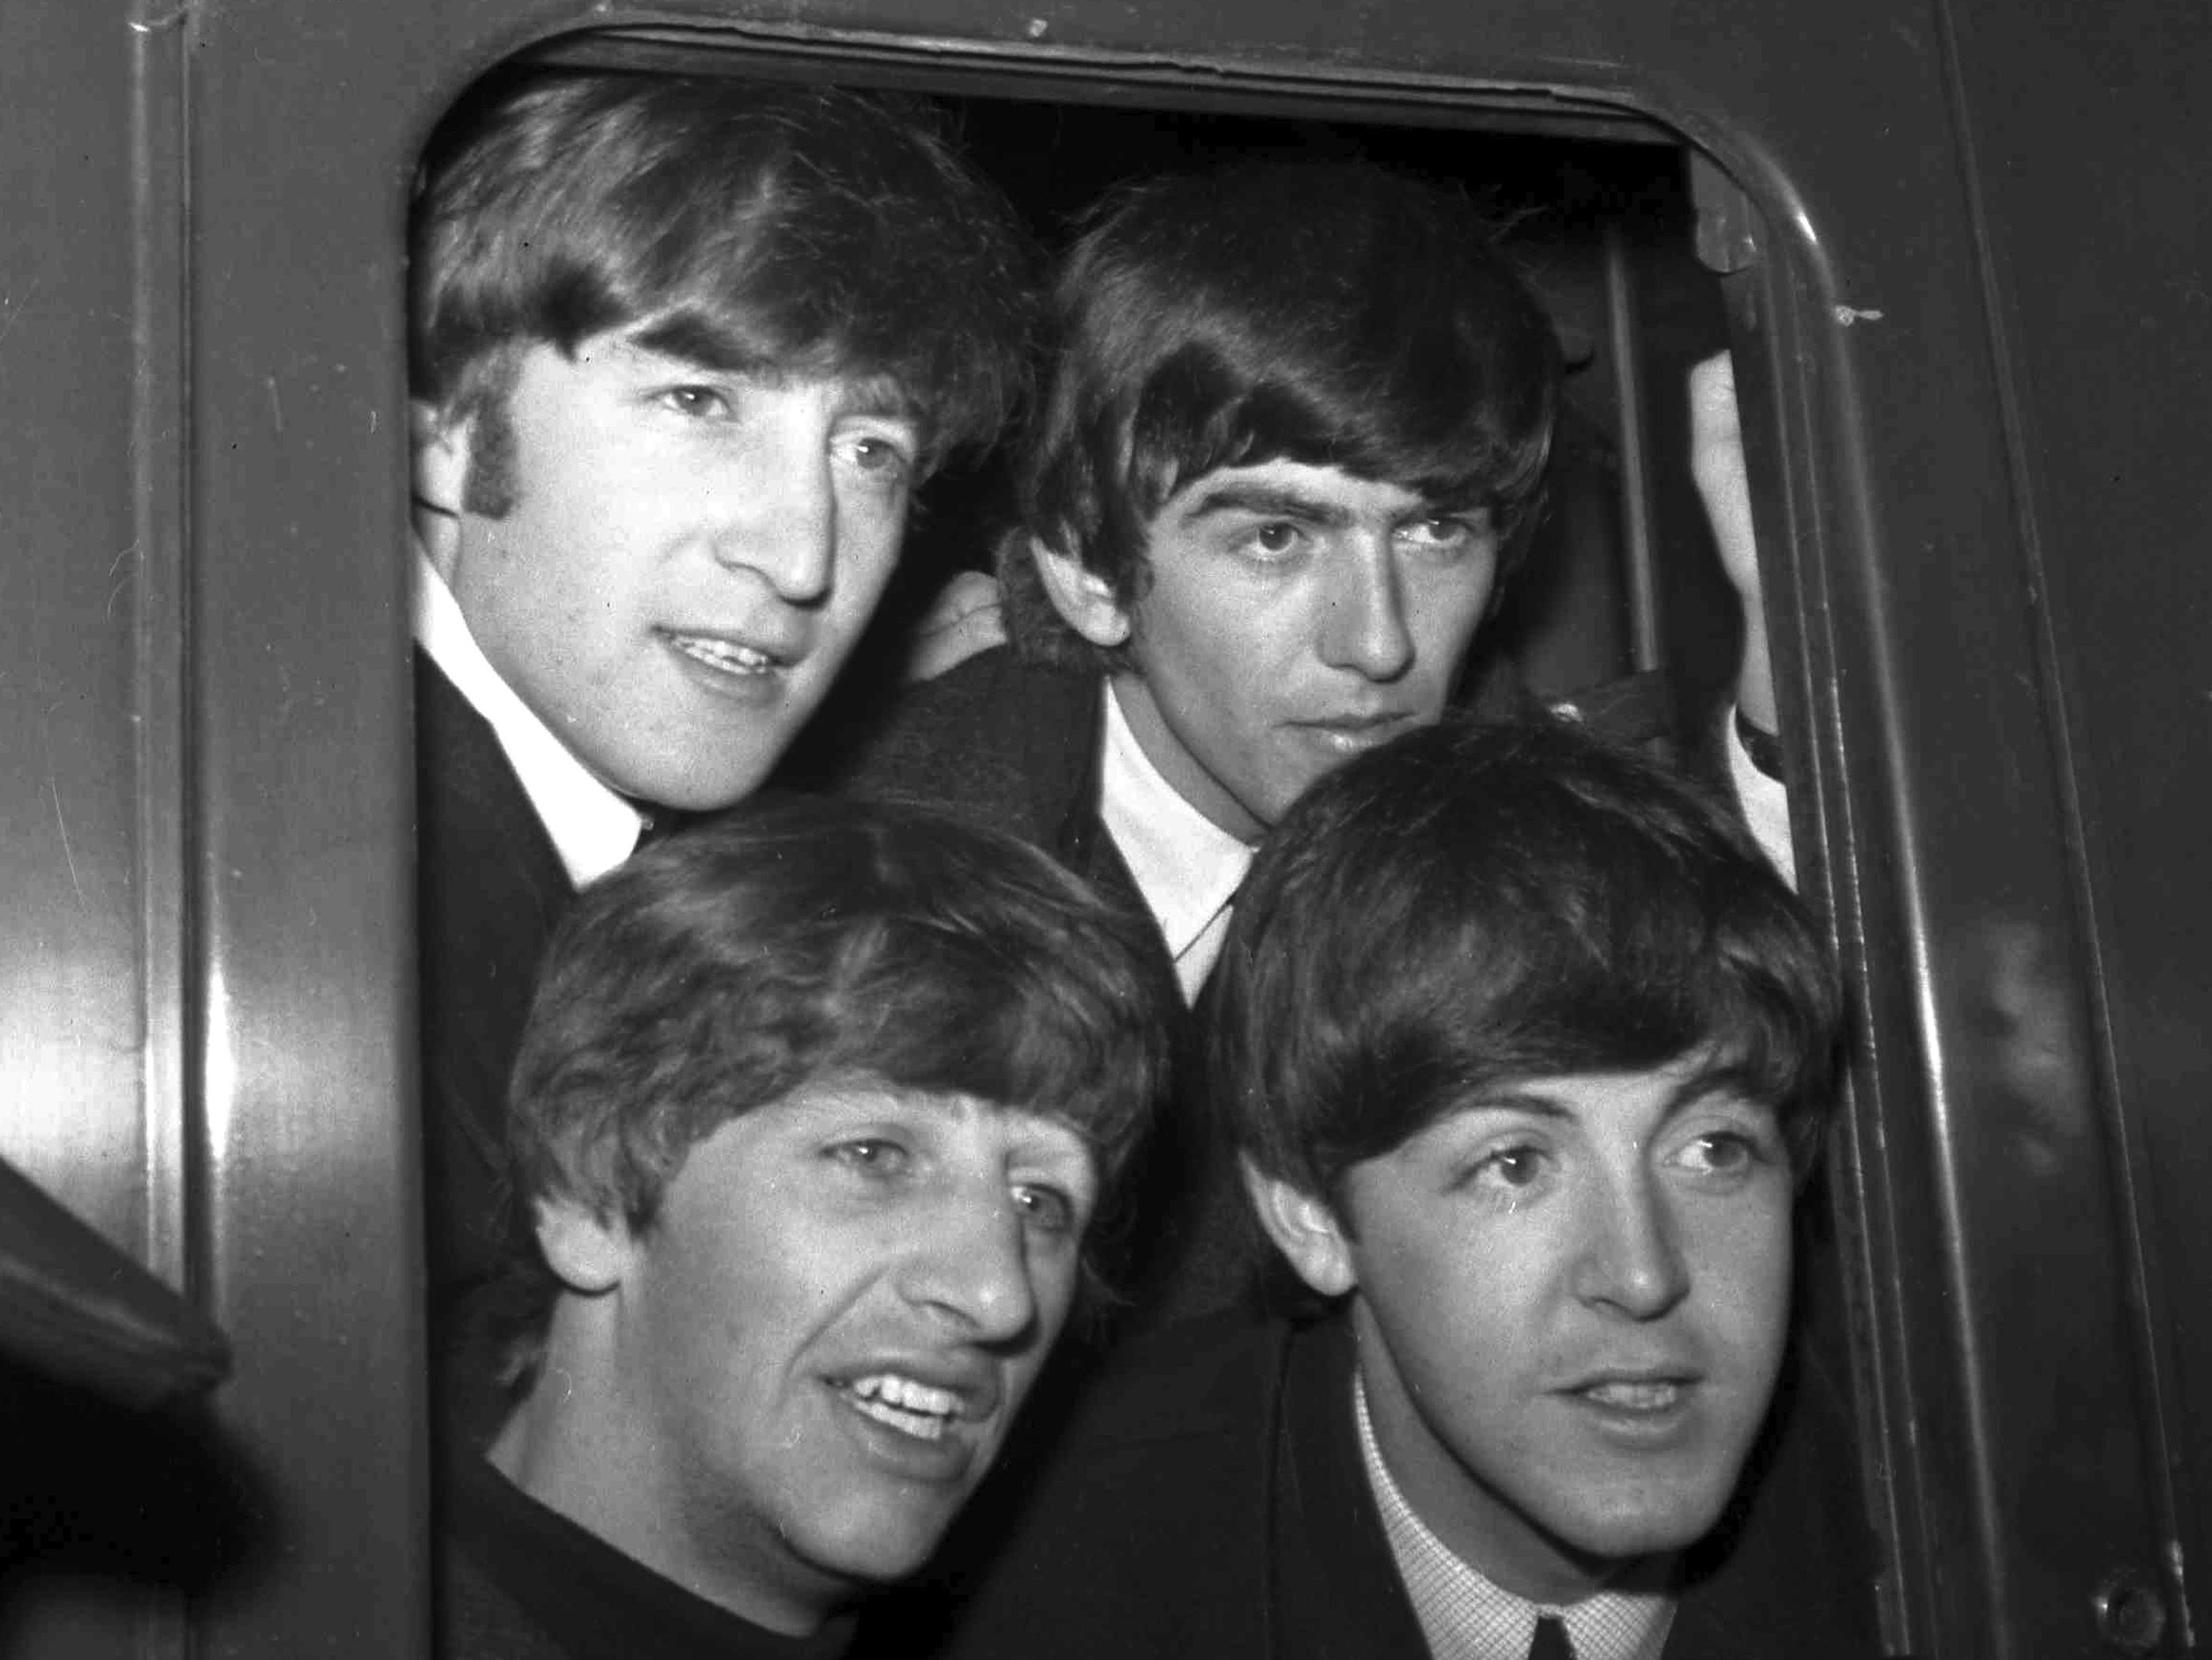 ‘Now and Then’, the new Beatles song, is bland and gooey